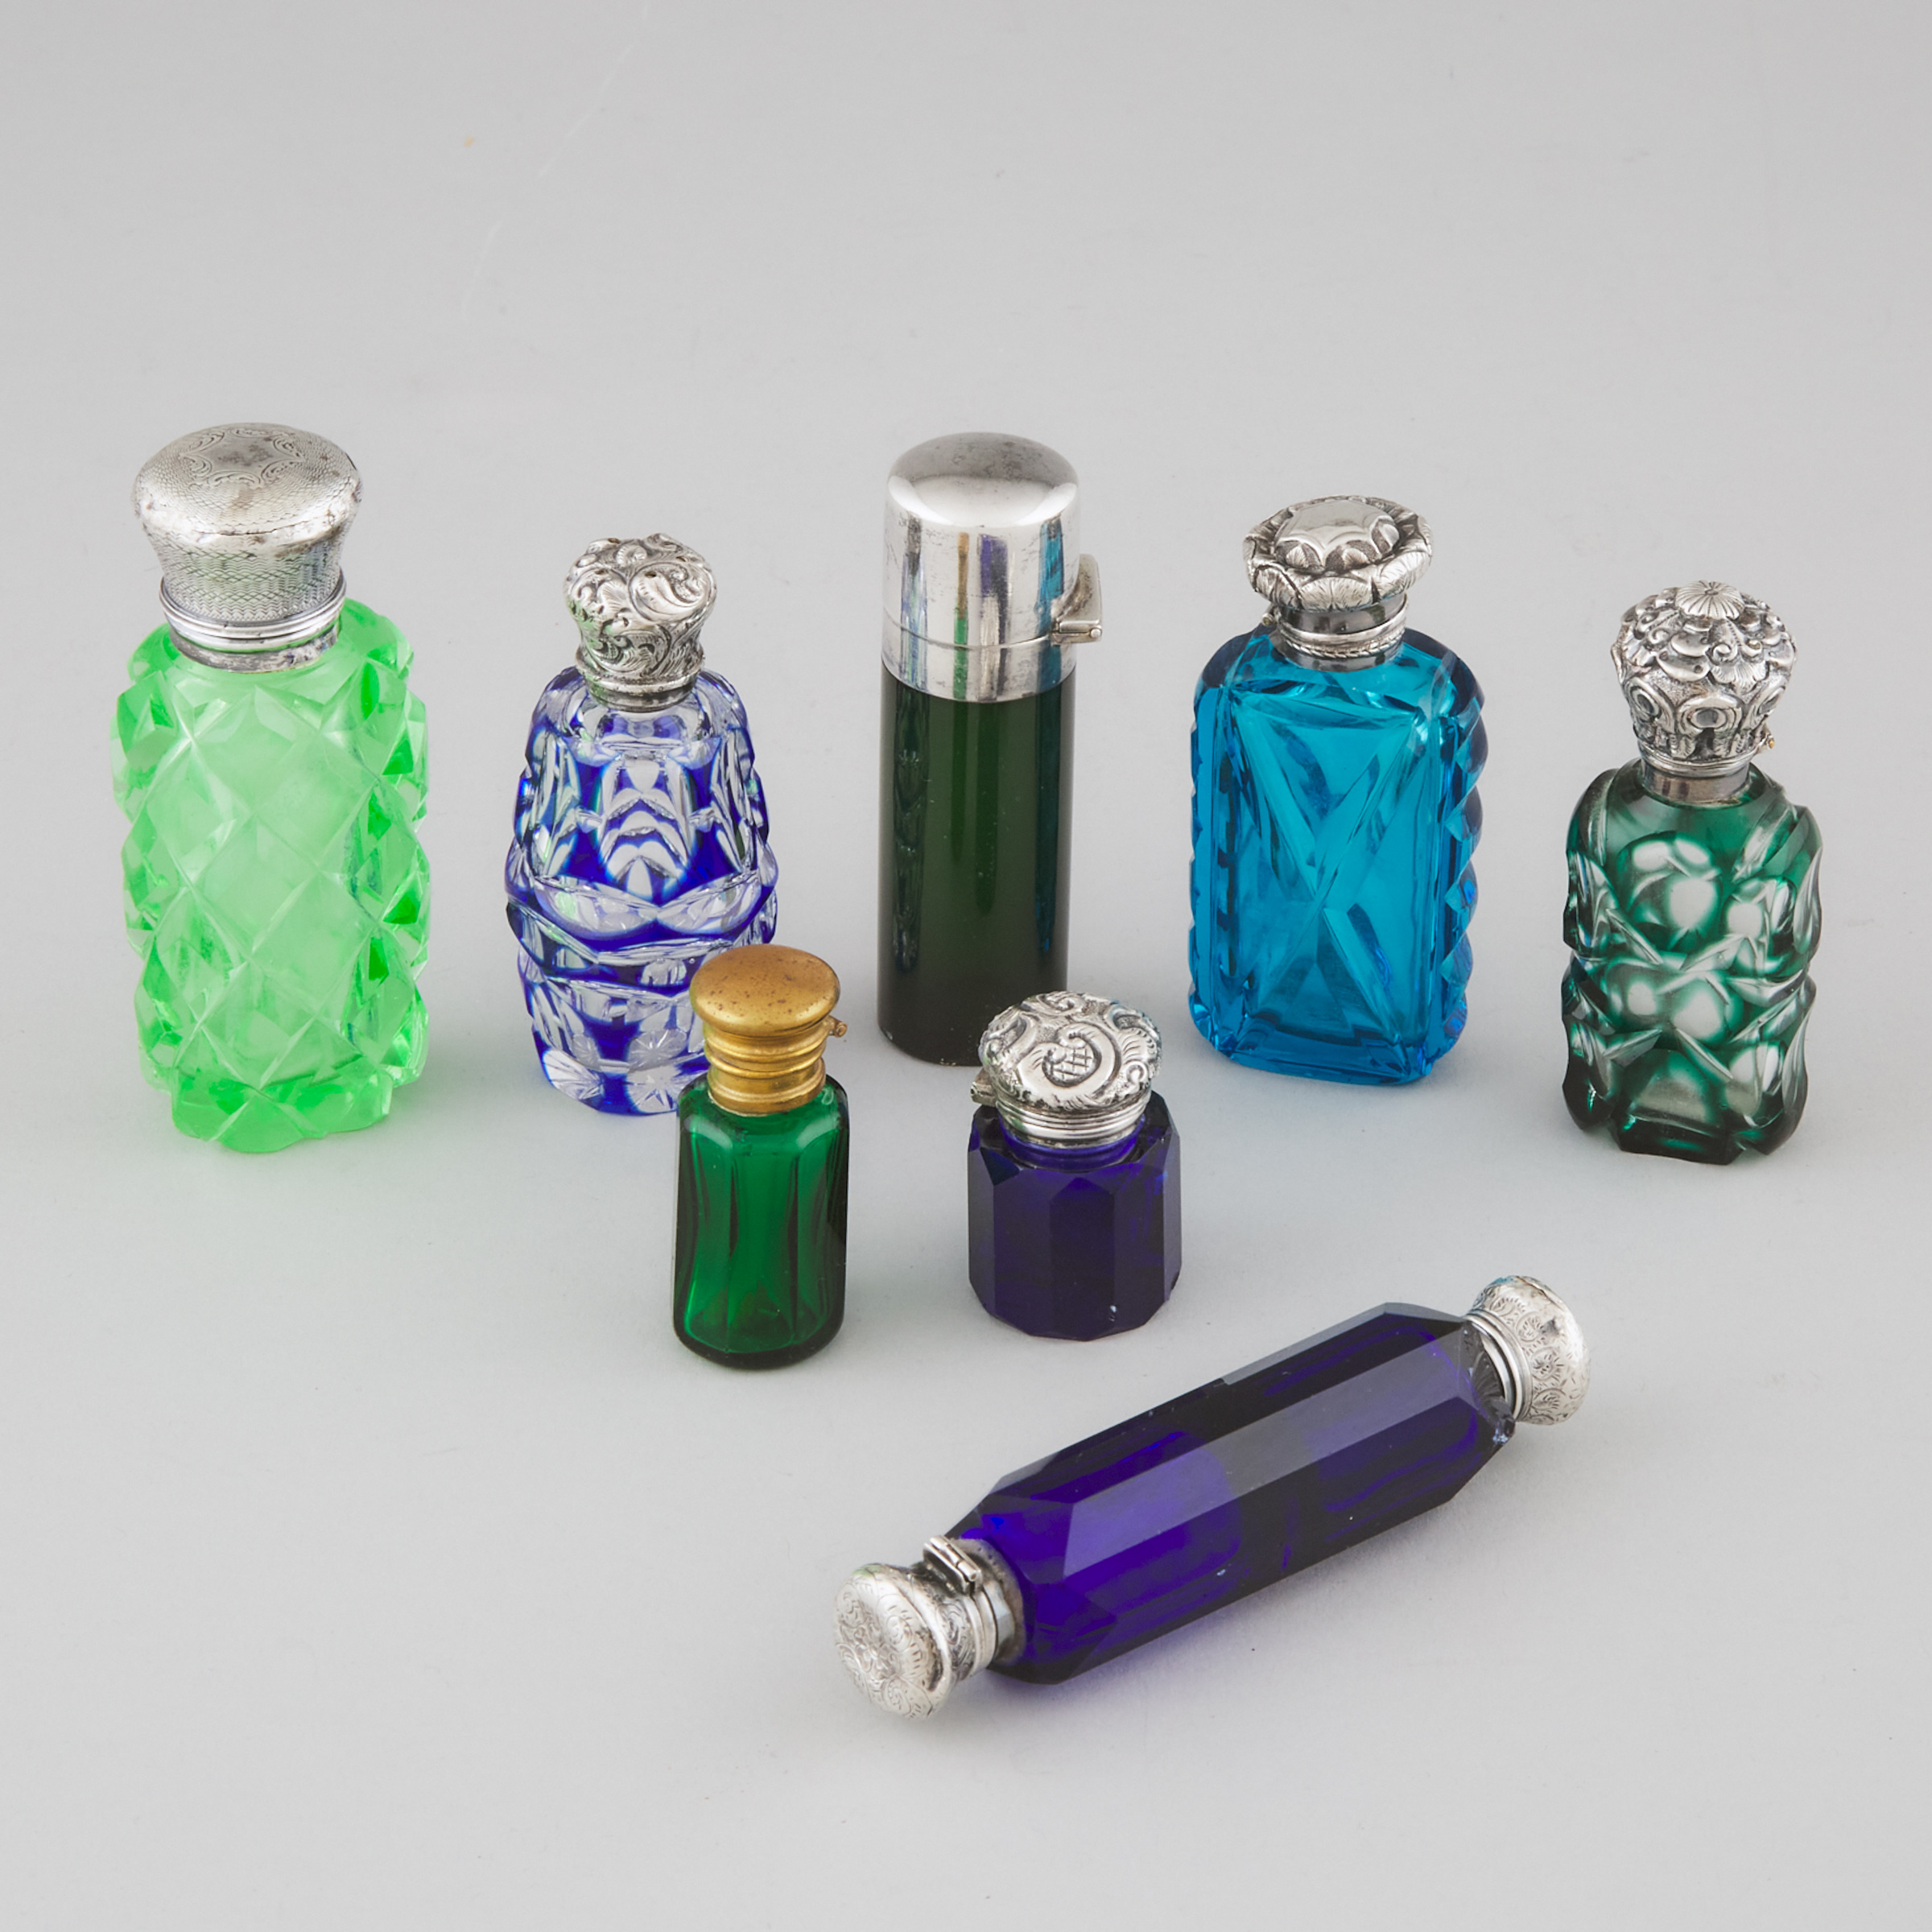 Eight Silver and Metal Mounted Coloured Glass Perfume Bottles and Phials, late 19th/early 20th century